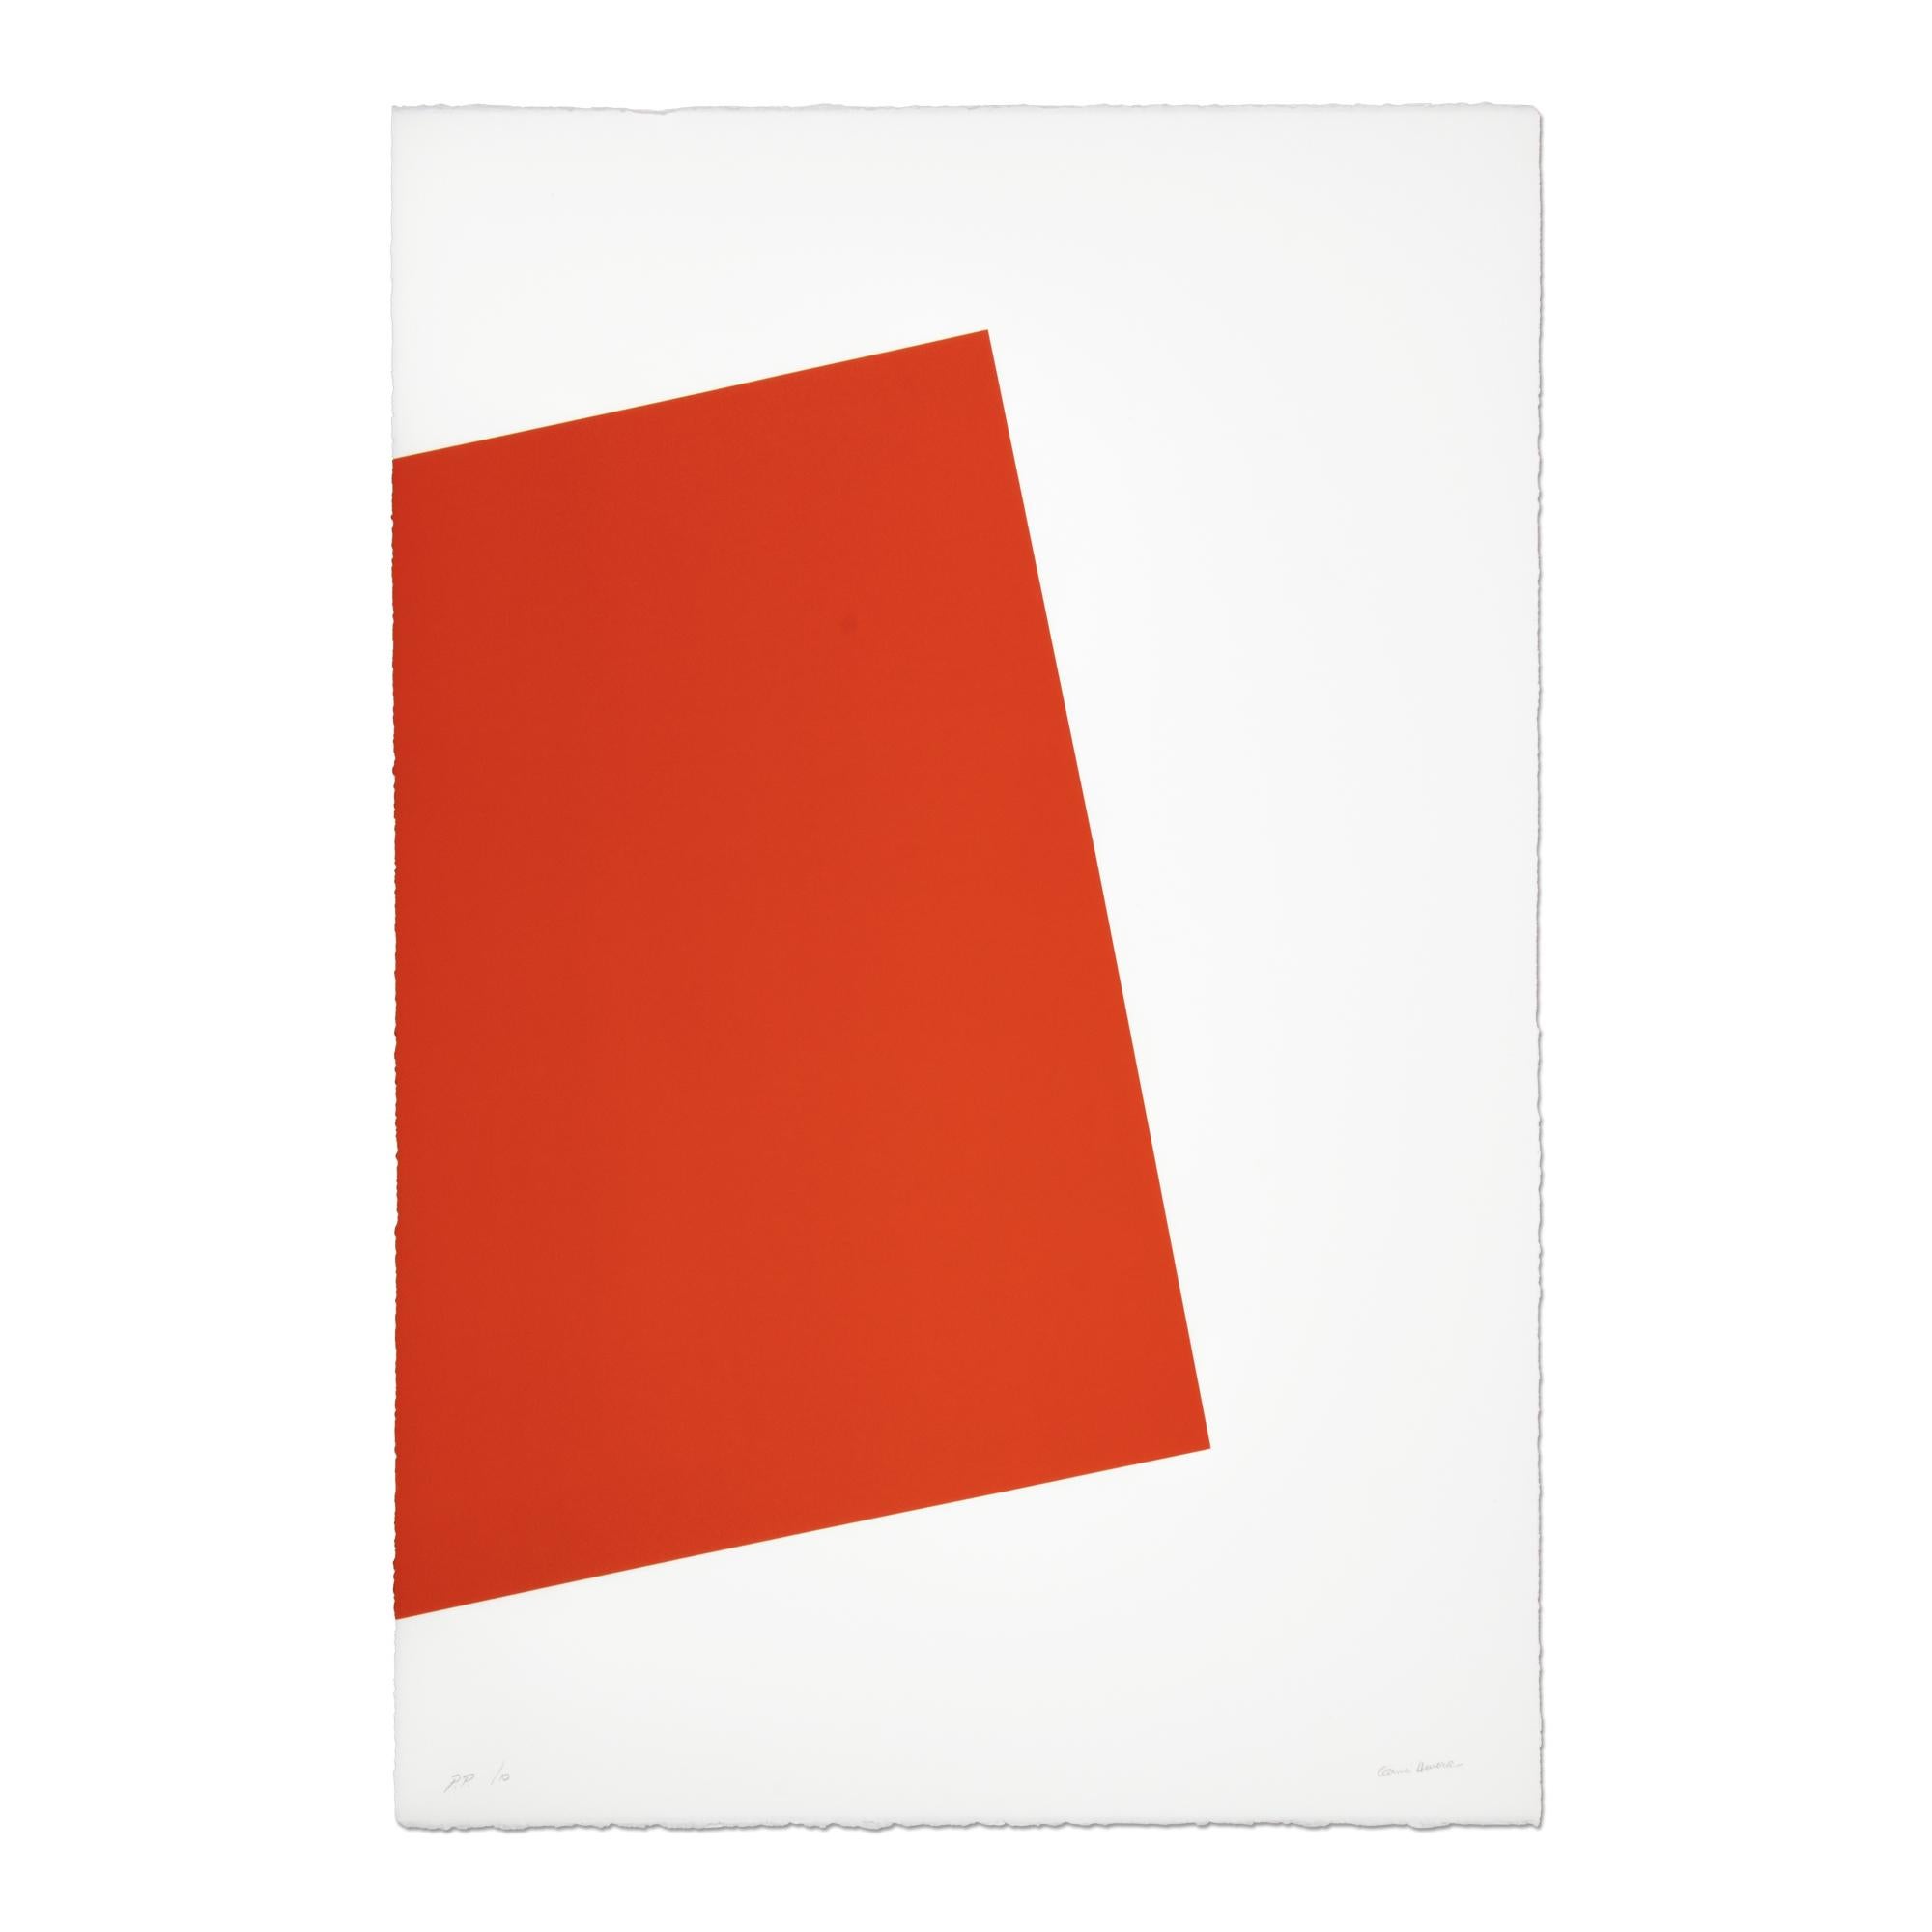 Carmen Herrera (Cuban, b. 1915)
Untitled (NRW), 2017
Medium: Lithograph in colors, on 300g Velin d’Arches paper
Dimensions: 100 x 67 cm
Edition size: 100 + 10 AP + 10 PP + 1 HC + 1 Archive: Hand-signed and numbered
Printed by Edition Copenhagen,